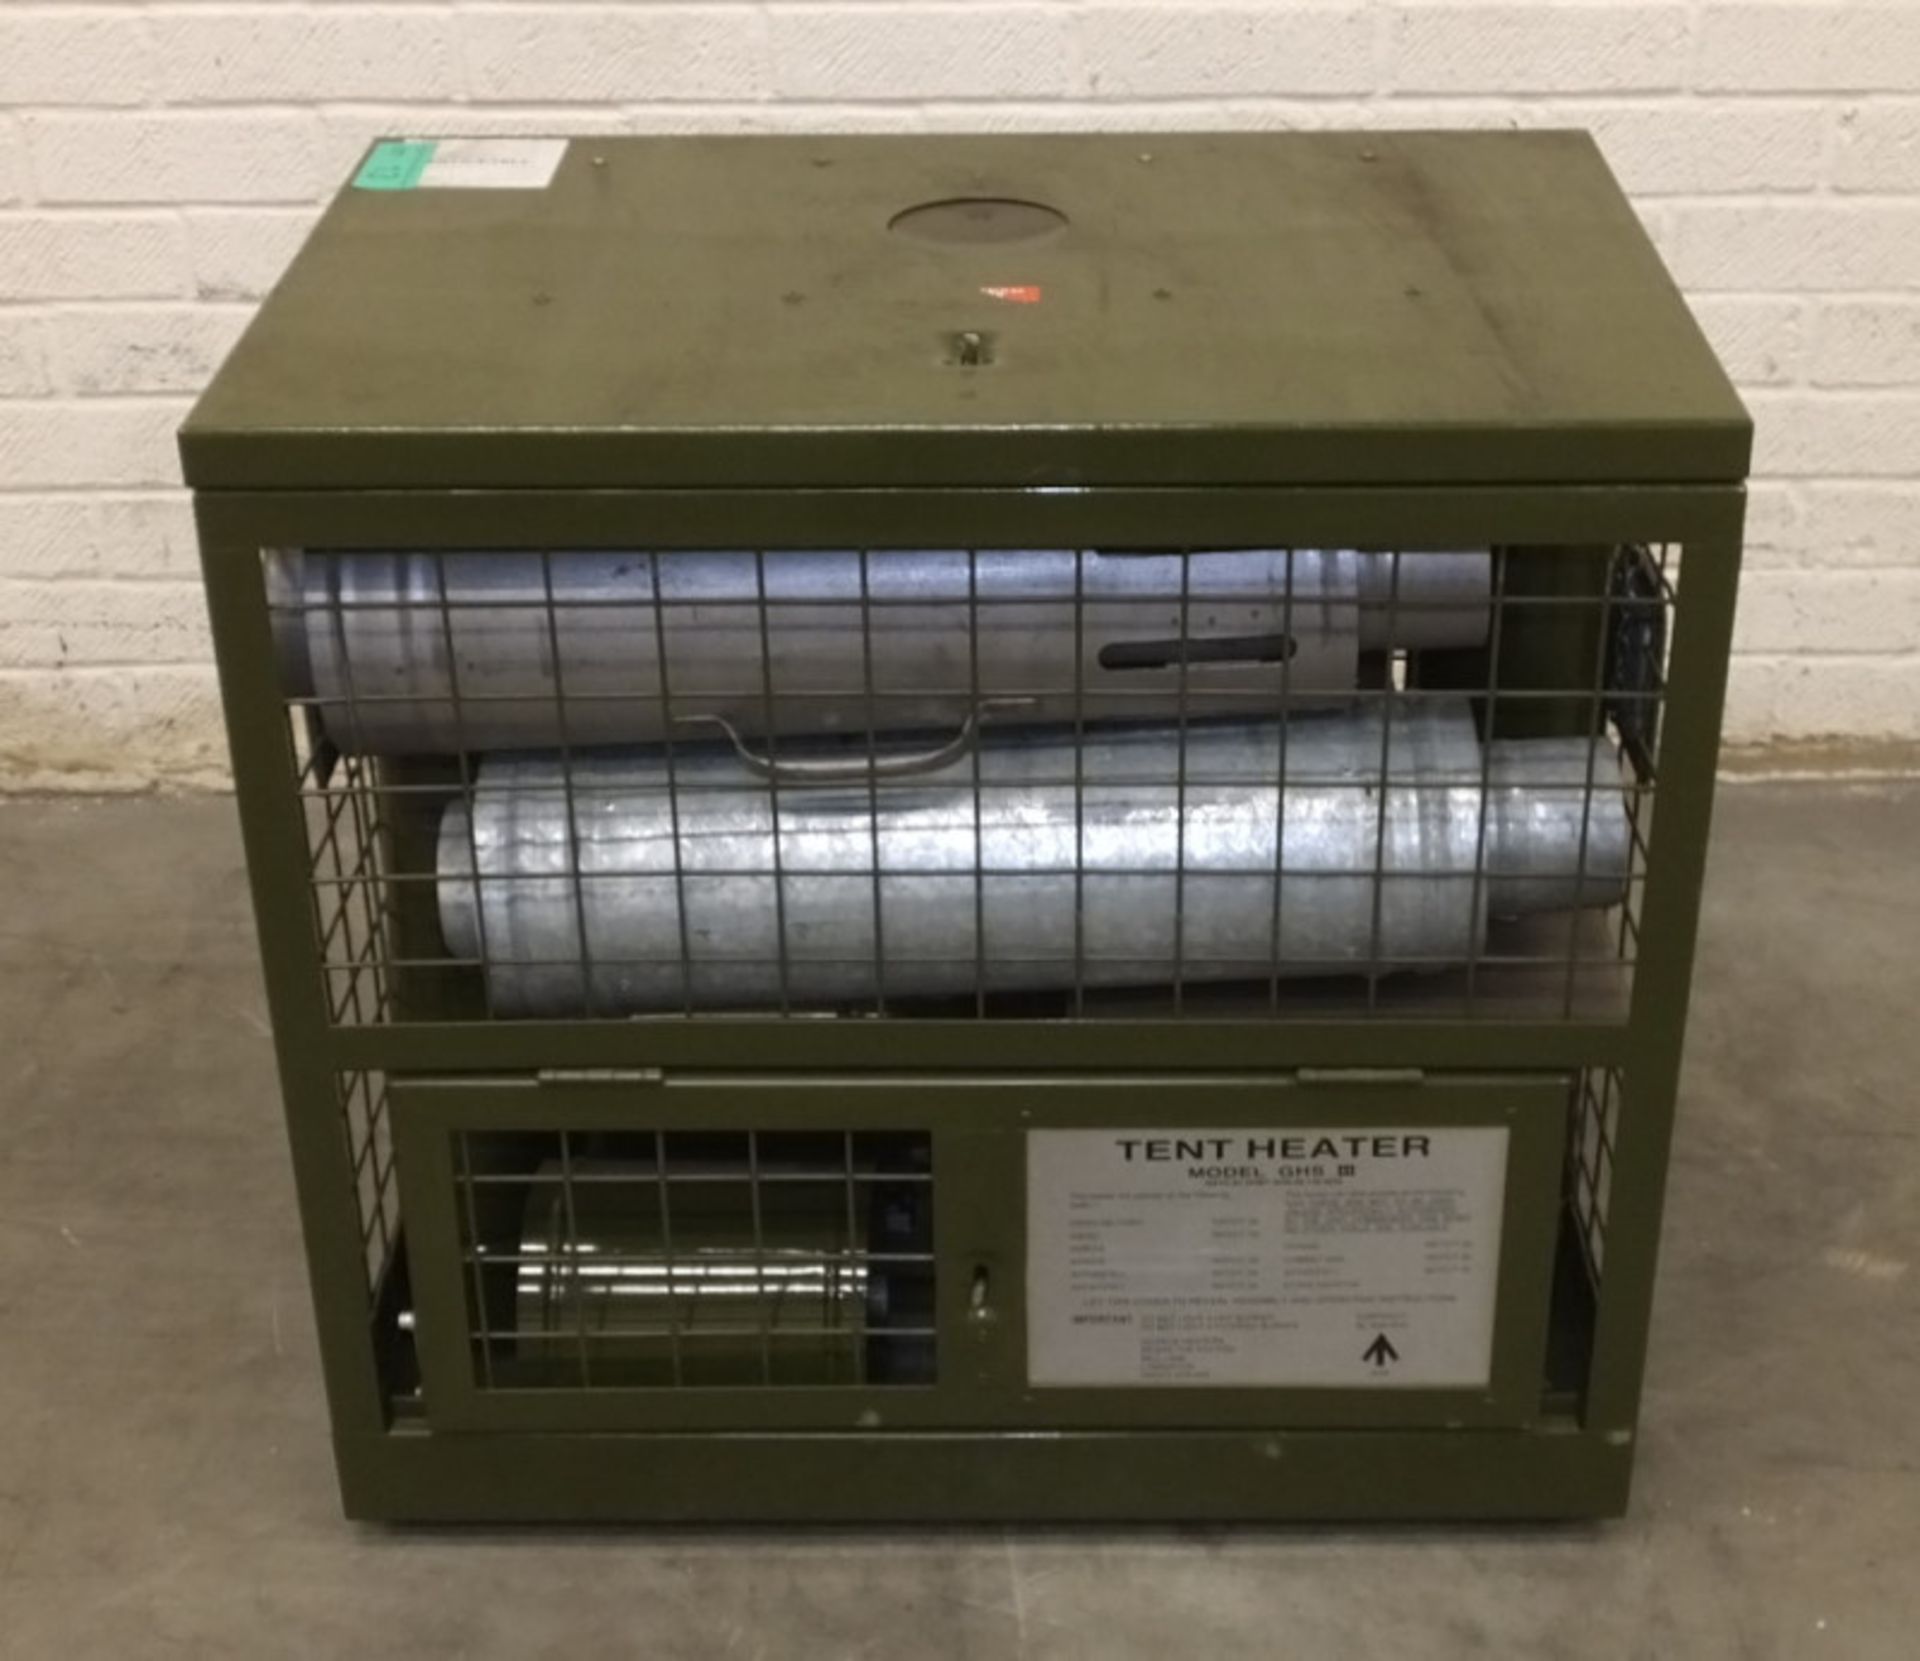 HotBox Heaters Tent Heater GHS III - NSN 4520-99-130-6045 Output - 5-15kW, Ex-MOD specific - Image 8 of 10